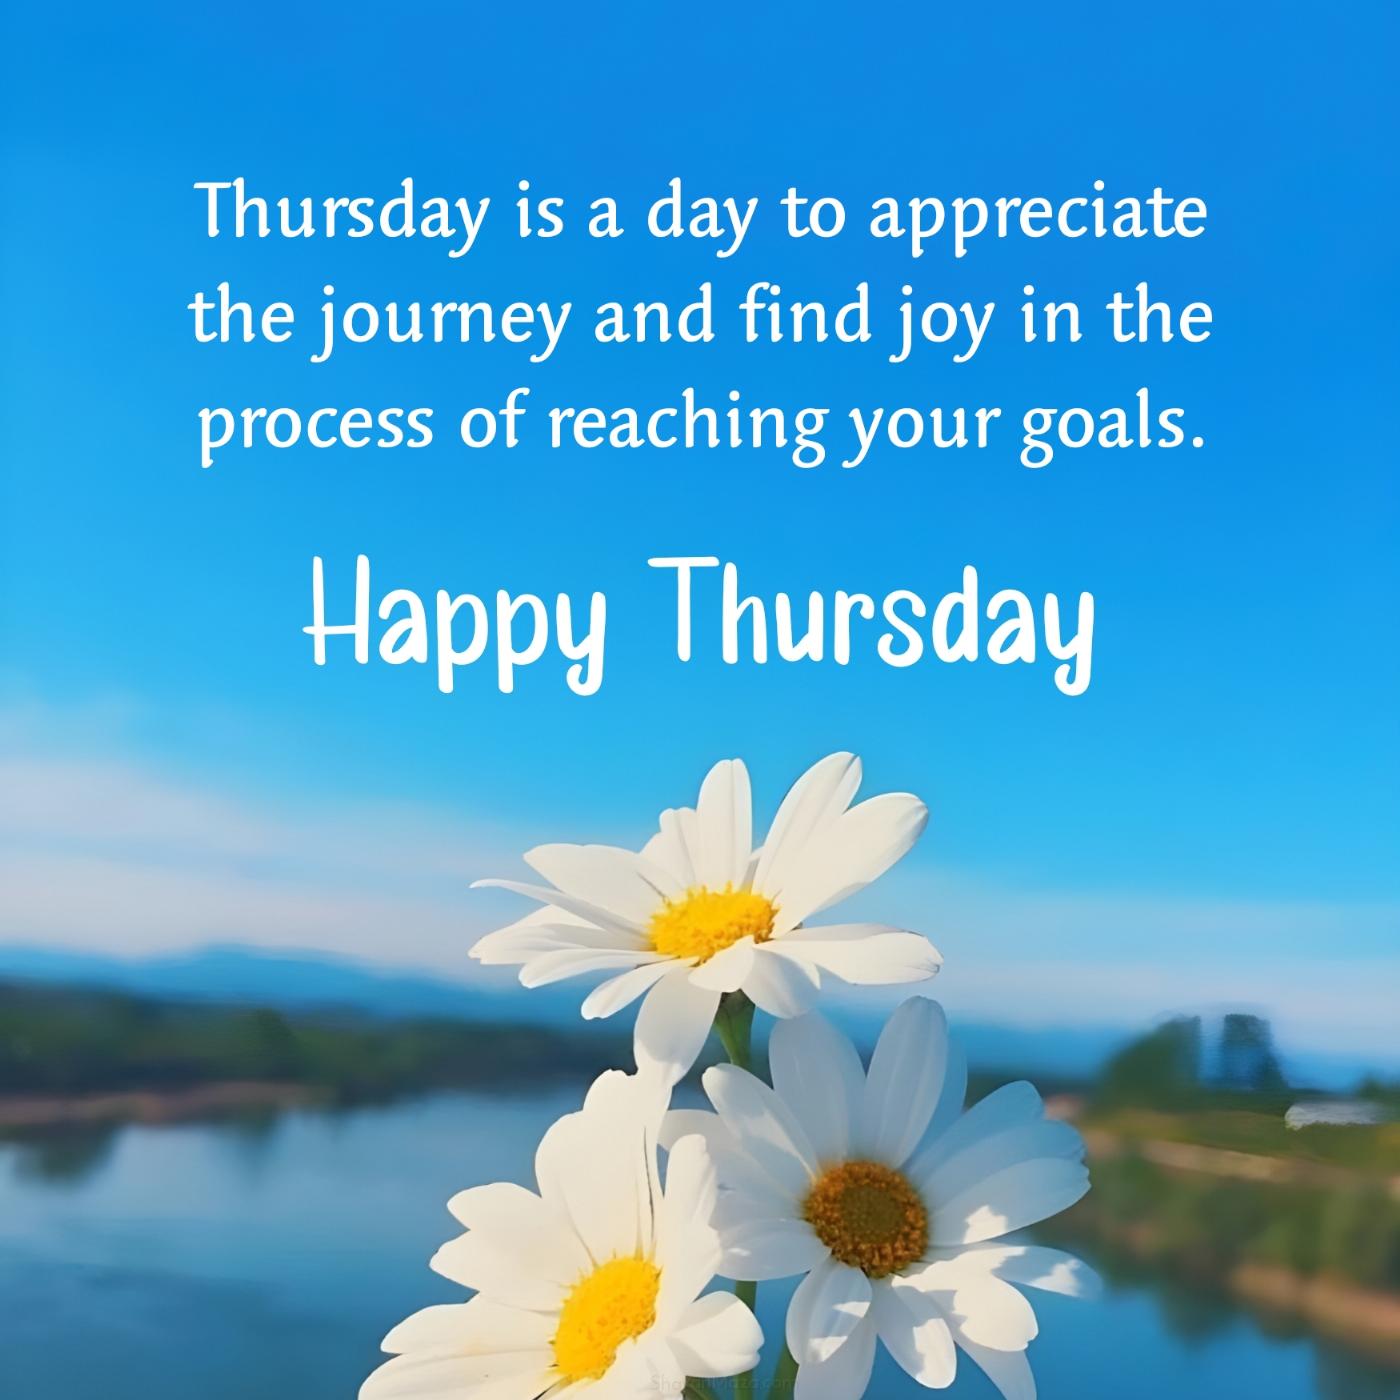 Thursday is a day to appreciate the journey and find joy